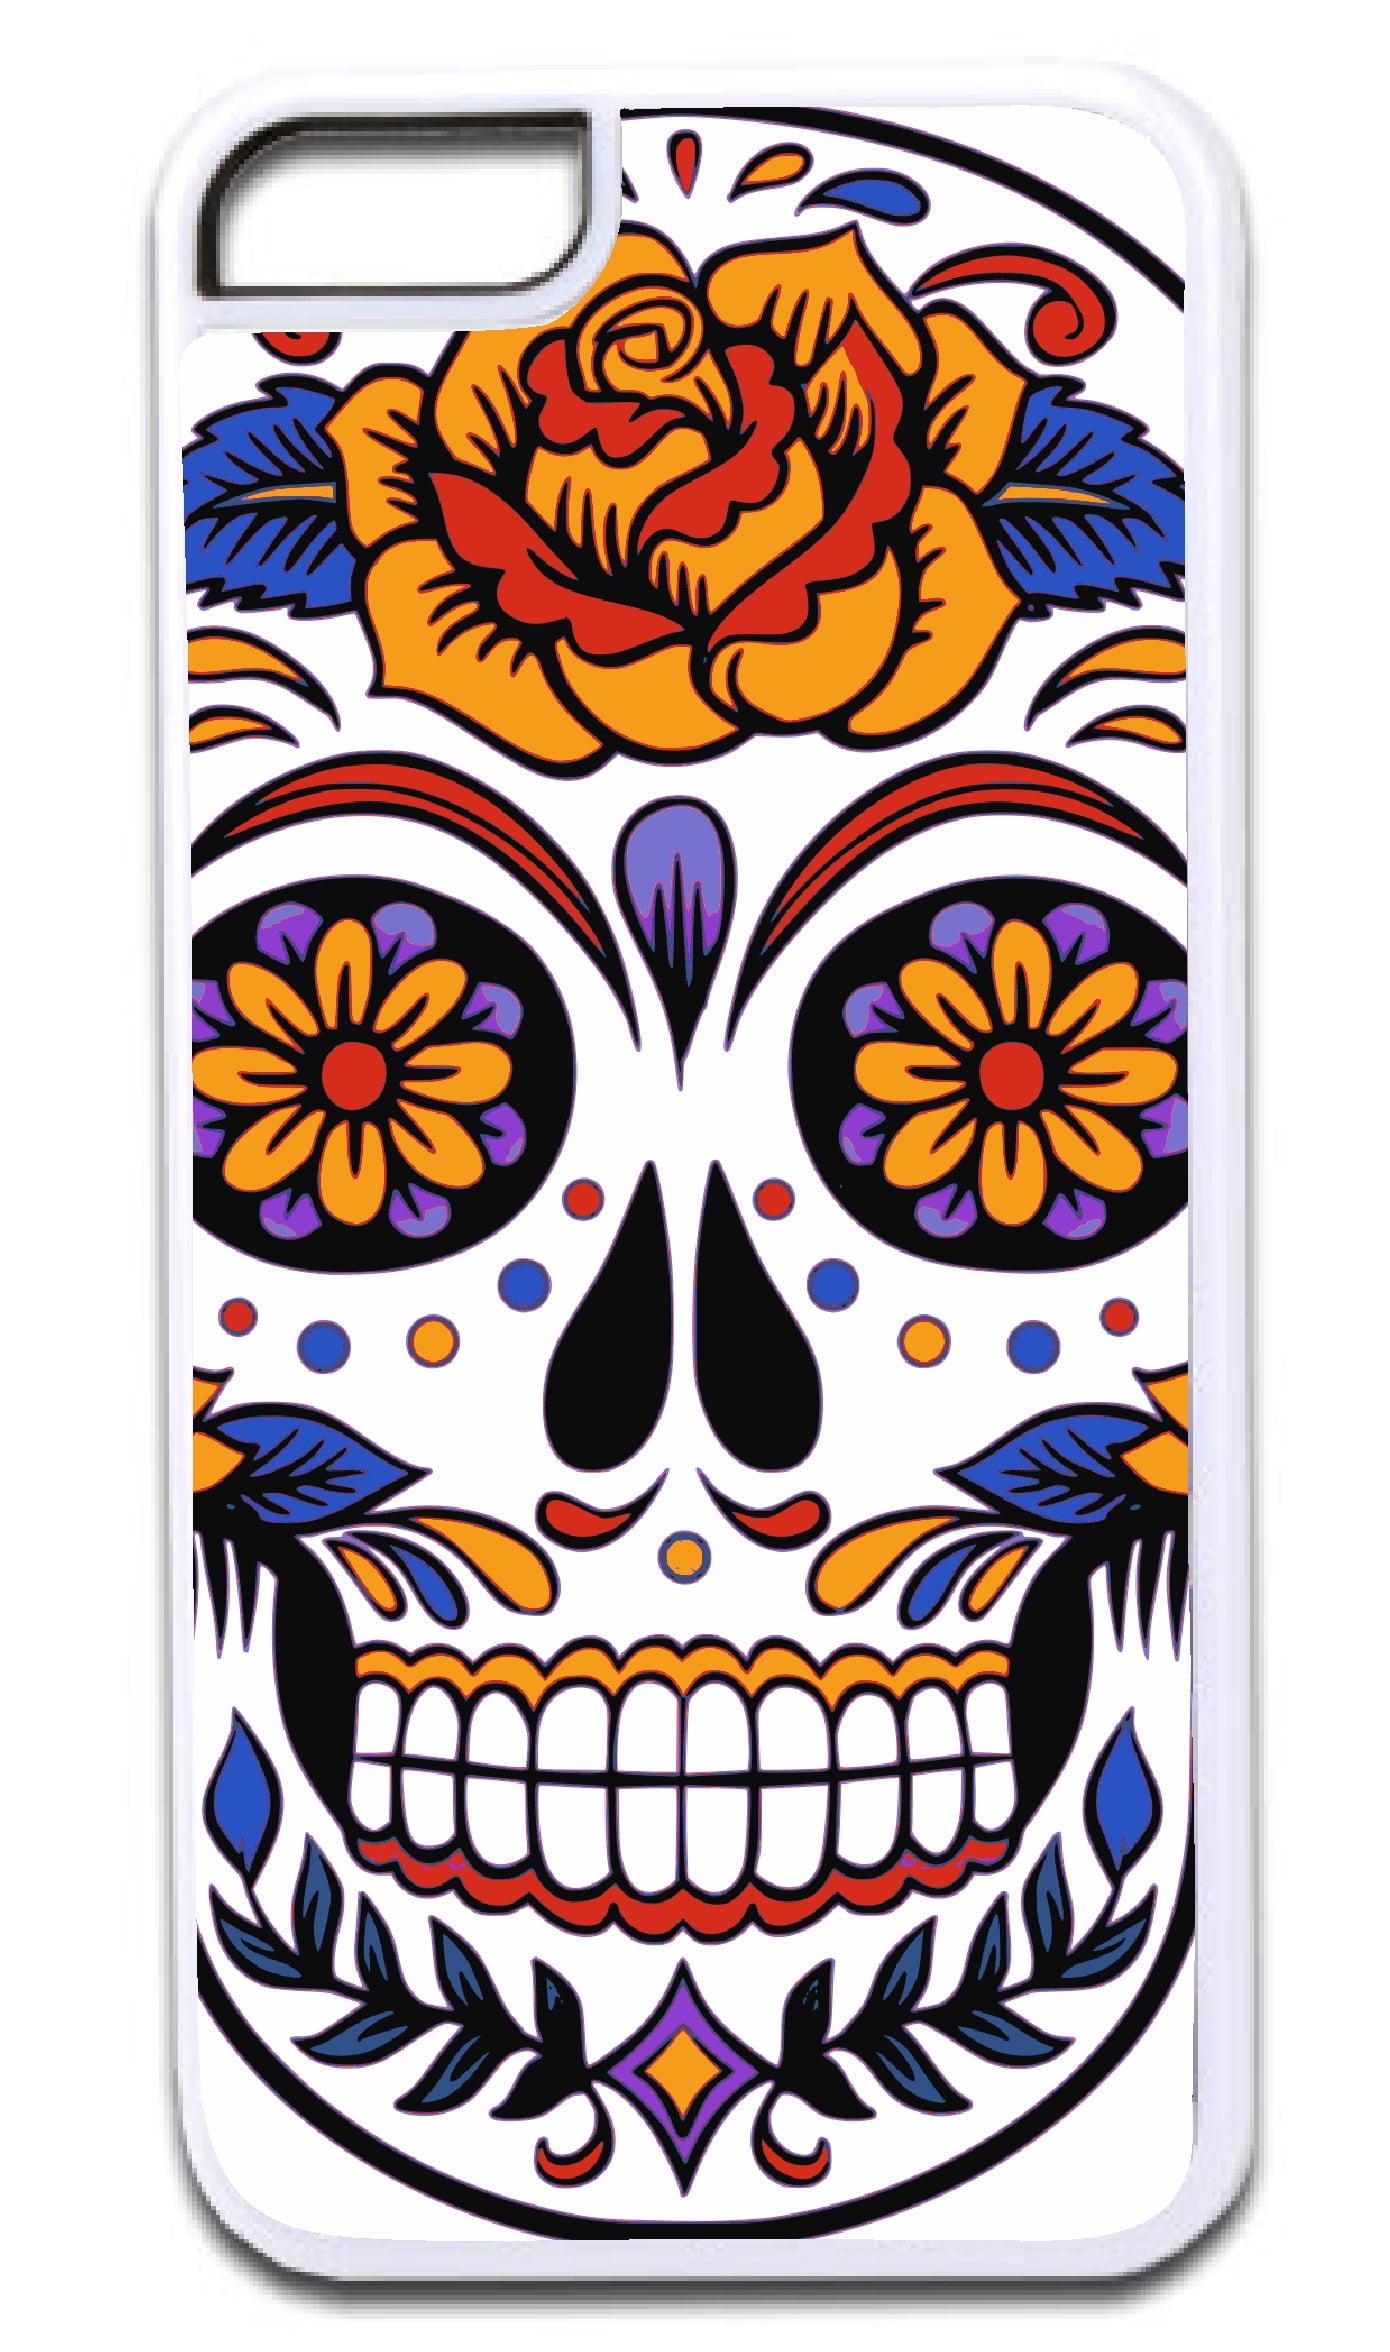 Floral Sugar Skull Design White Rubber Case for the Apple iPhone 6 / iPhone 6s - iPhone 6 Accessories - iPhone 6s Accessories